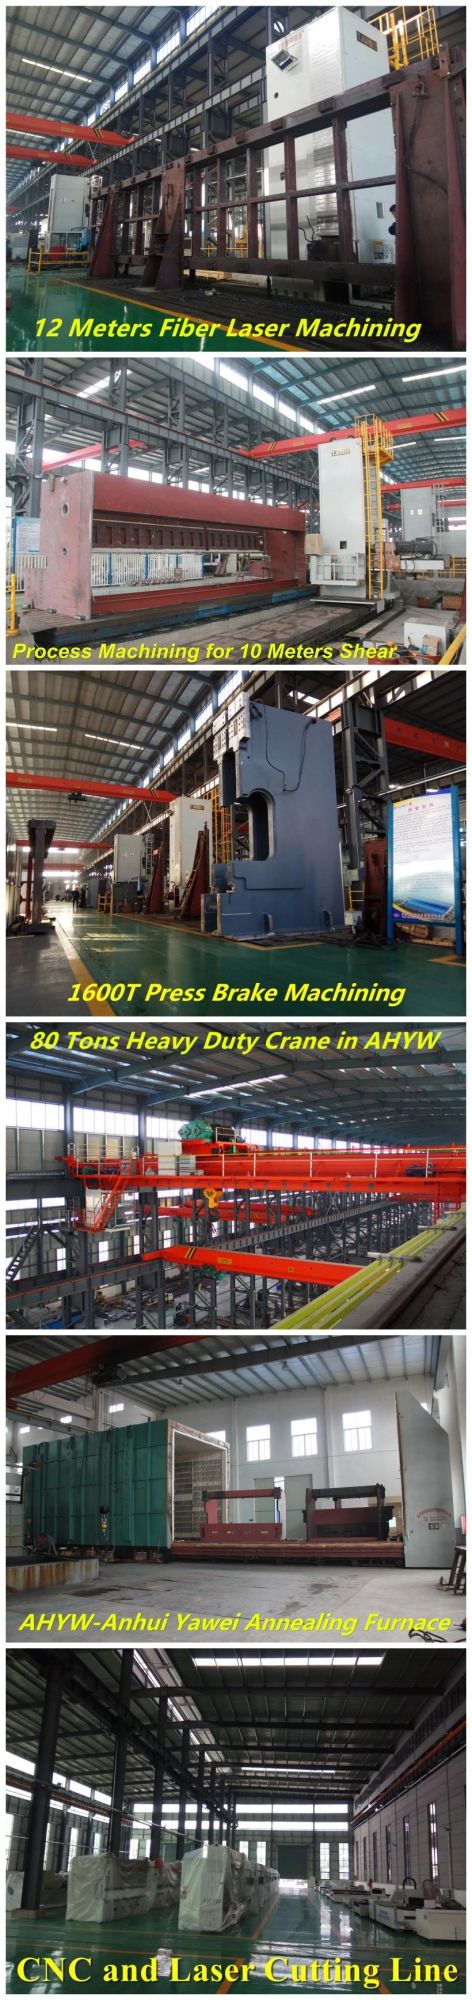 Hand Operated Guillotine Machine From Anhui Yawei with Ahyw Logo for Metal Sheet Cutting